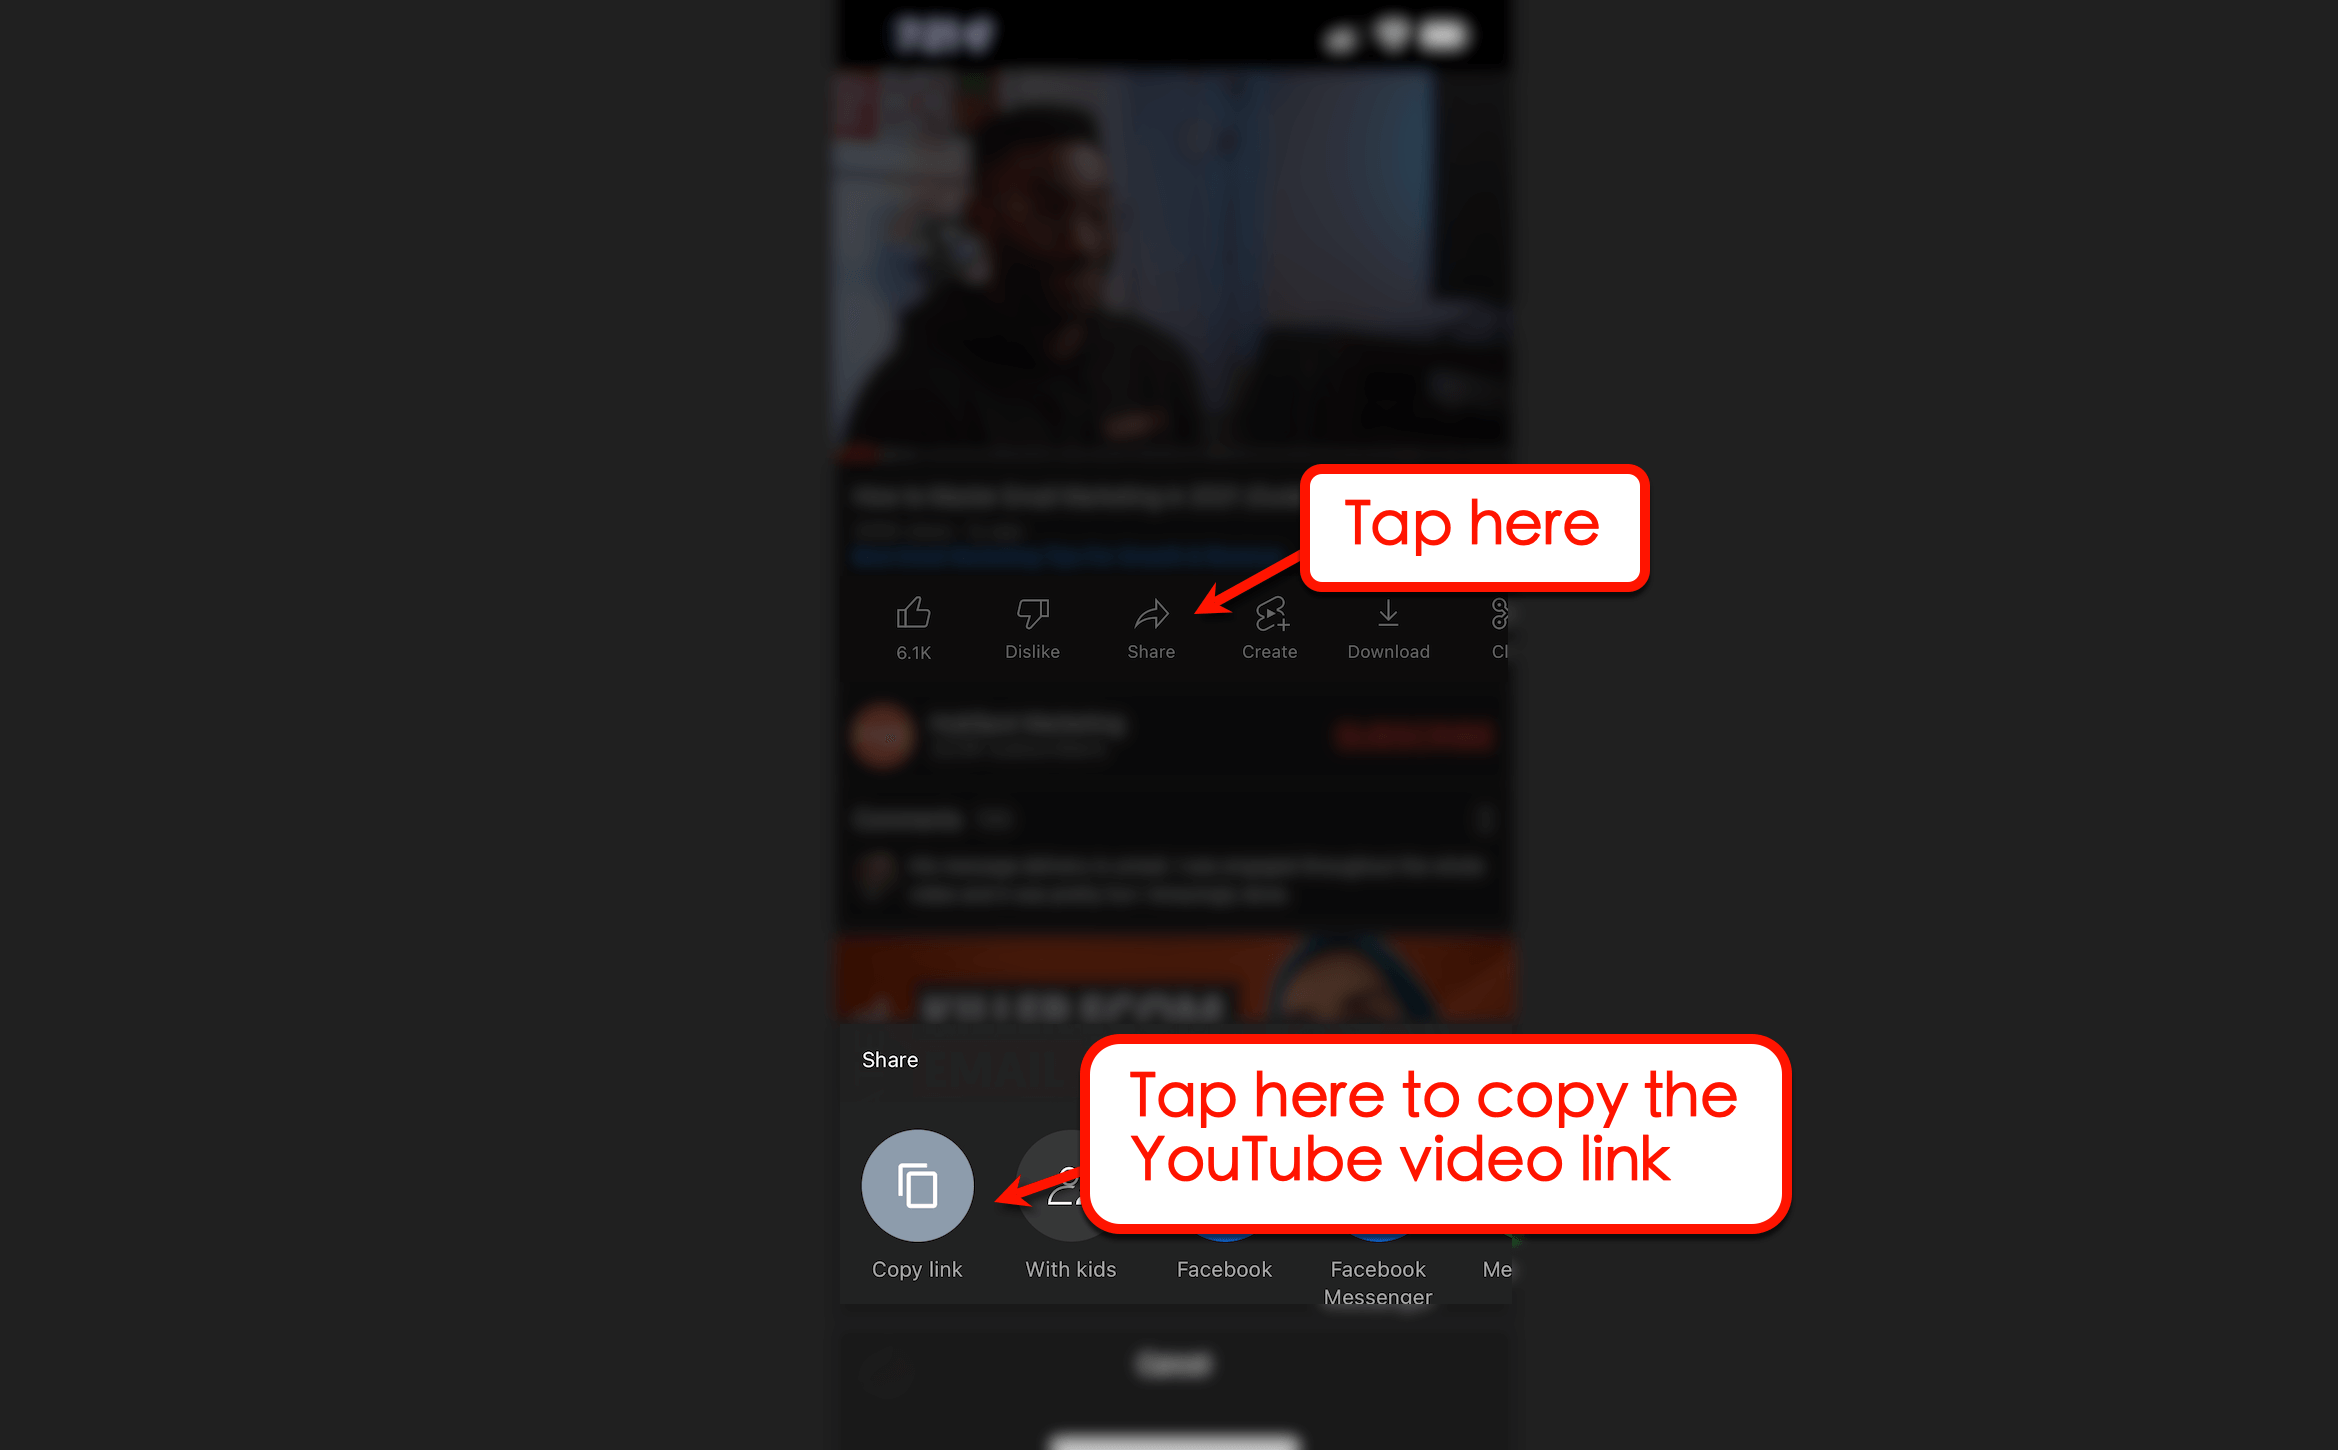 How to copy the Youtube video link